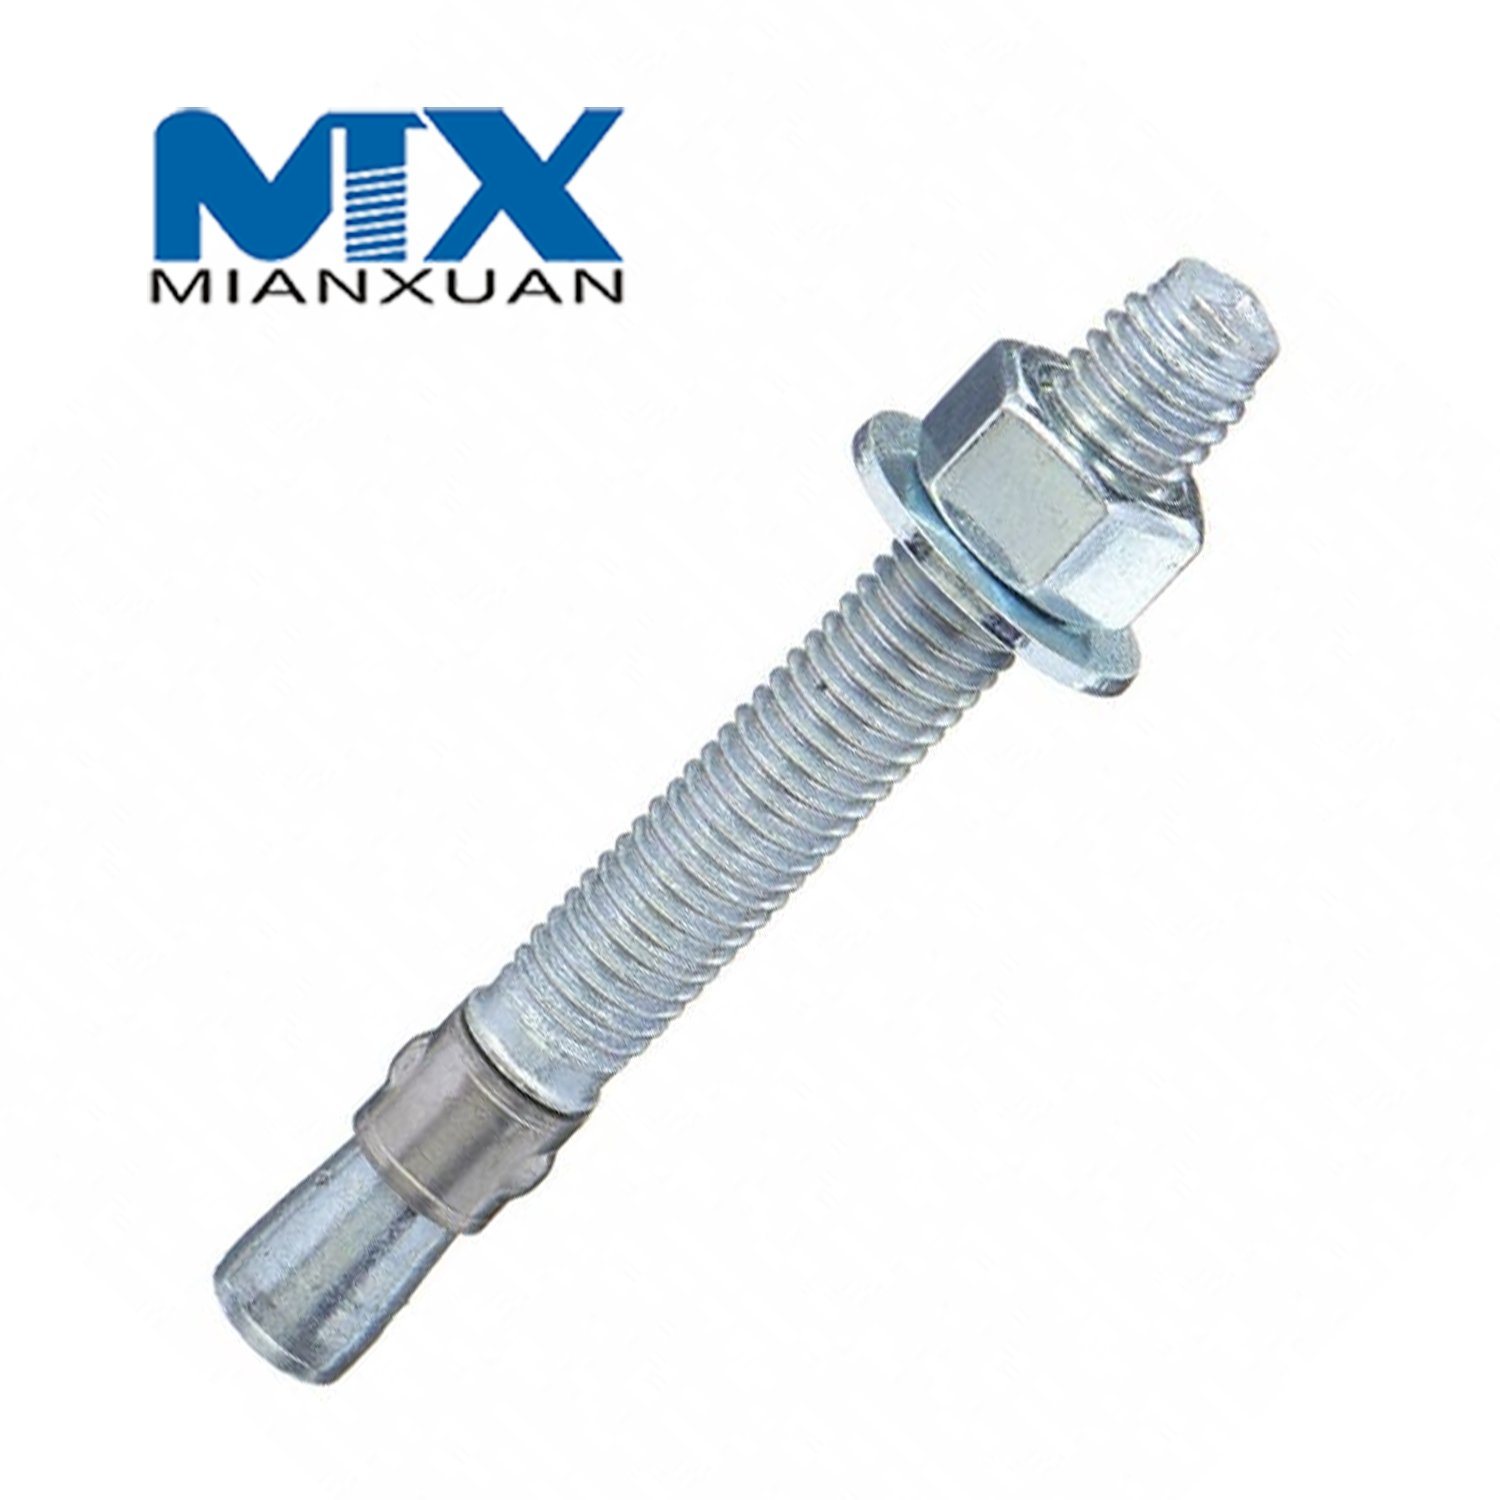 Stainless Steel Construction Bolt for Expansion Hollow Wall Fastener Lifting Anchor Manufacturer